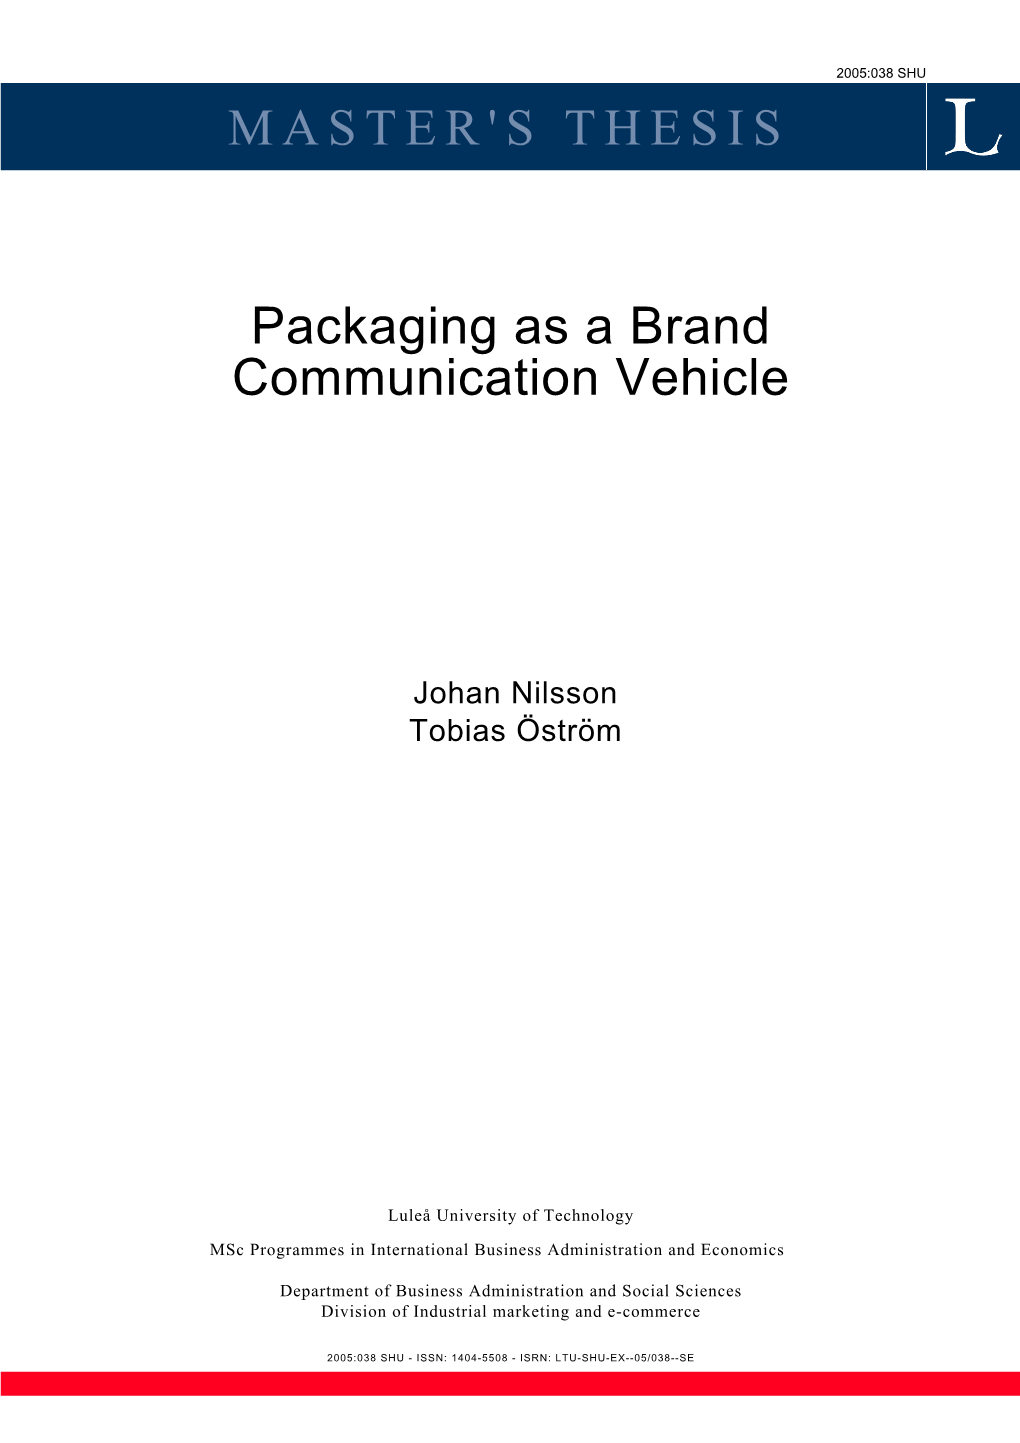 Packaging As a Brand Communication Vehicle